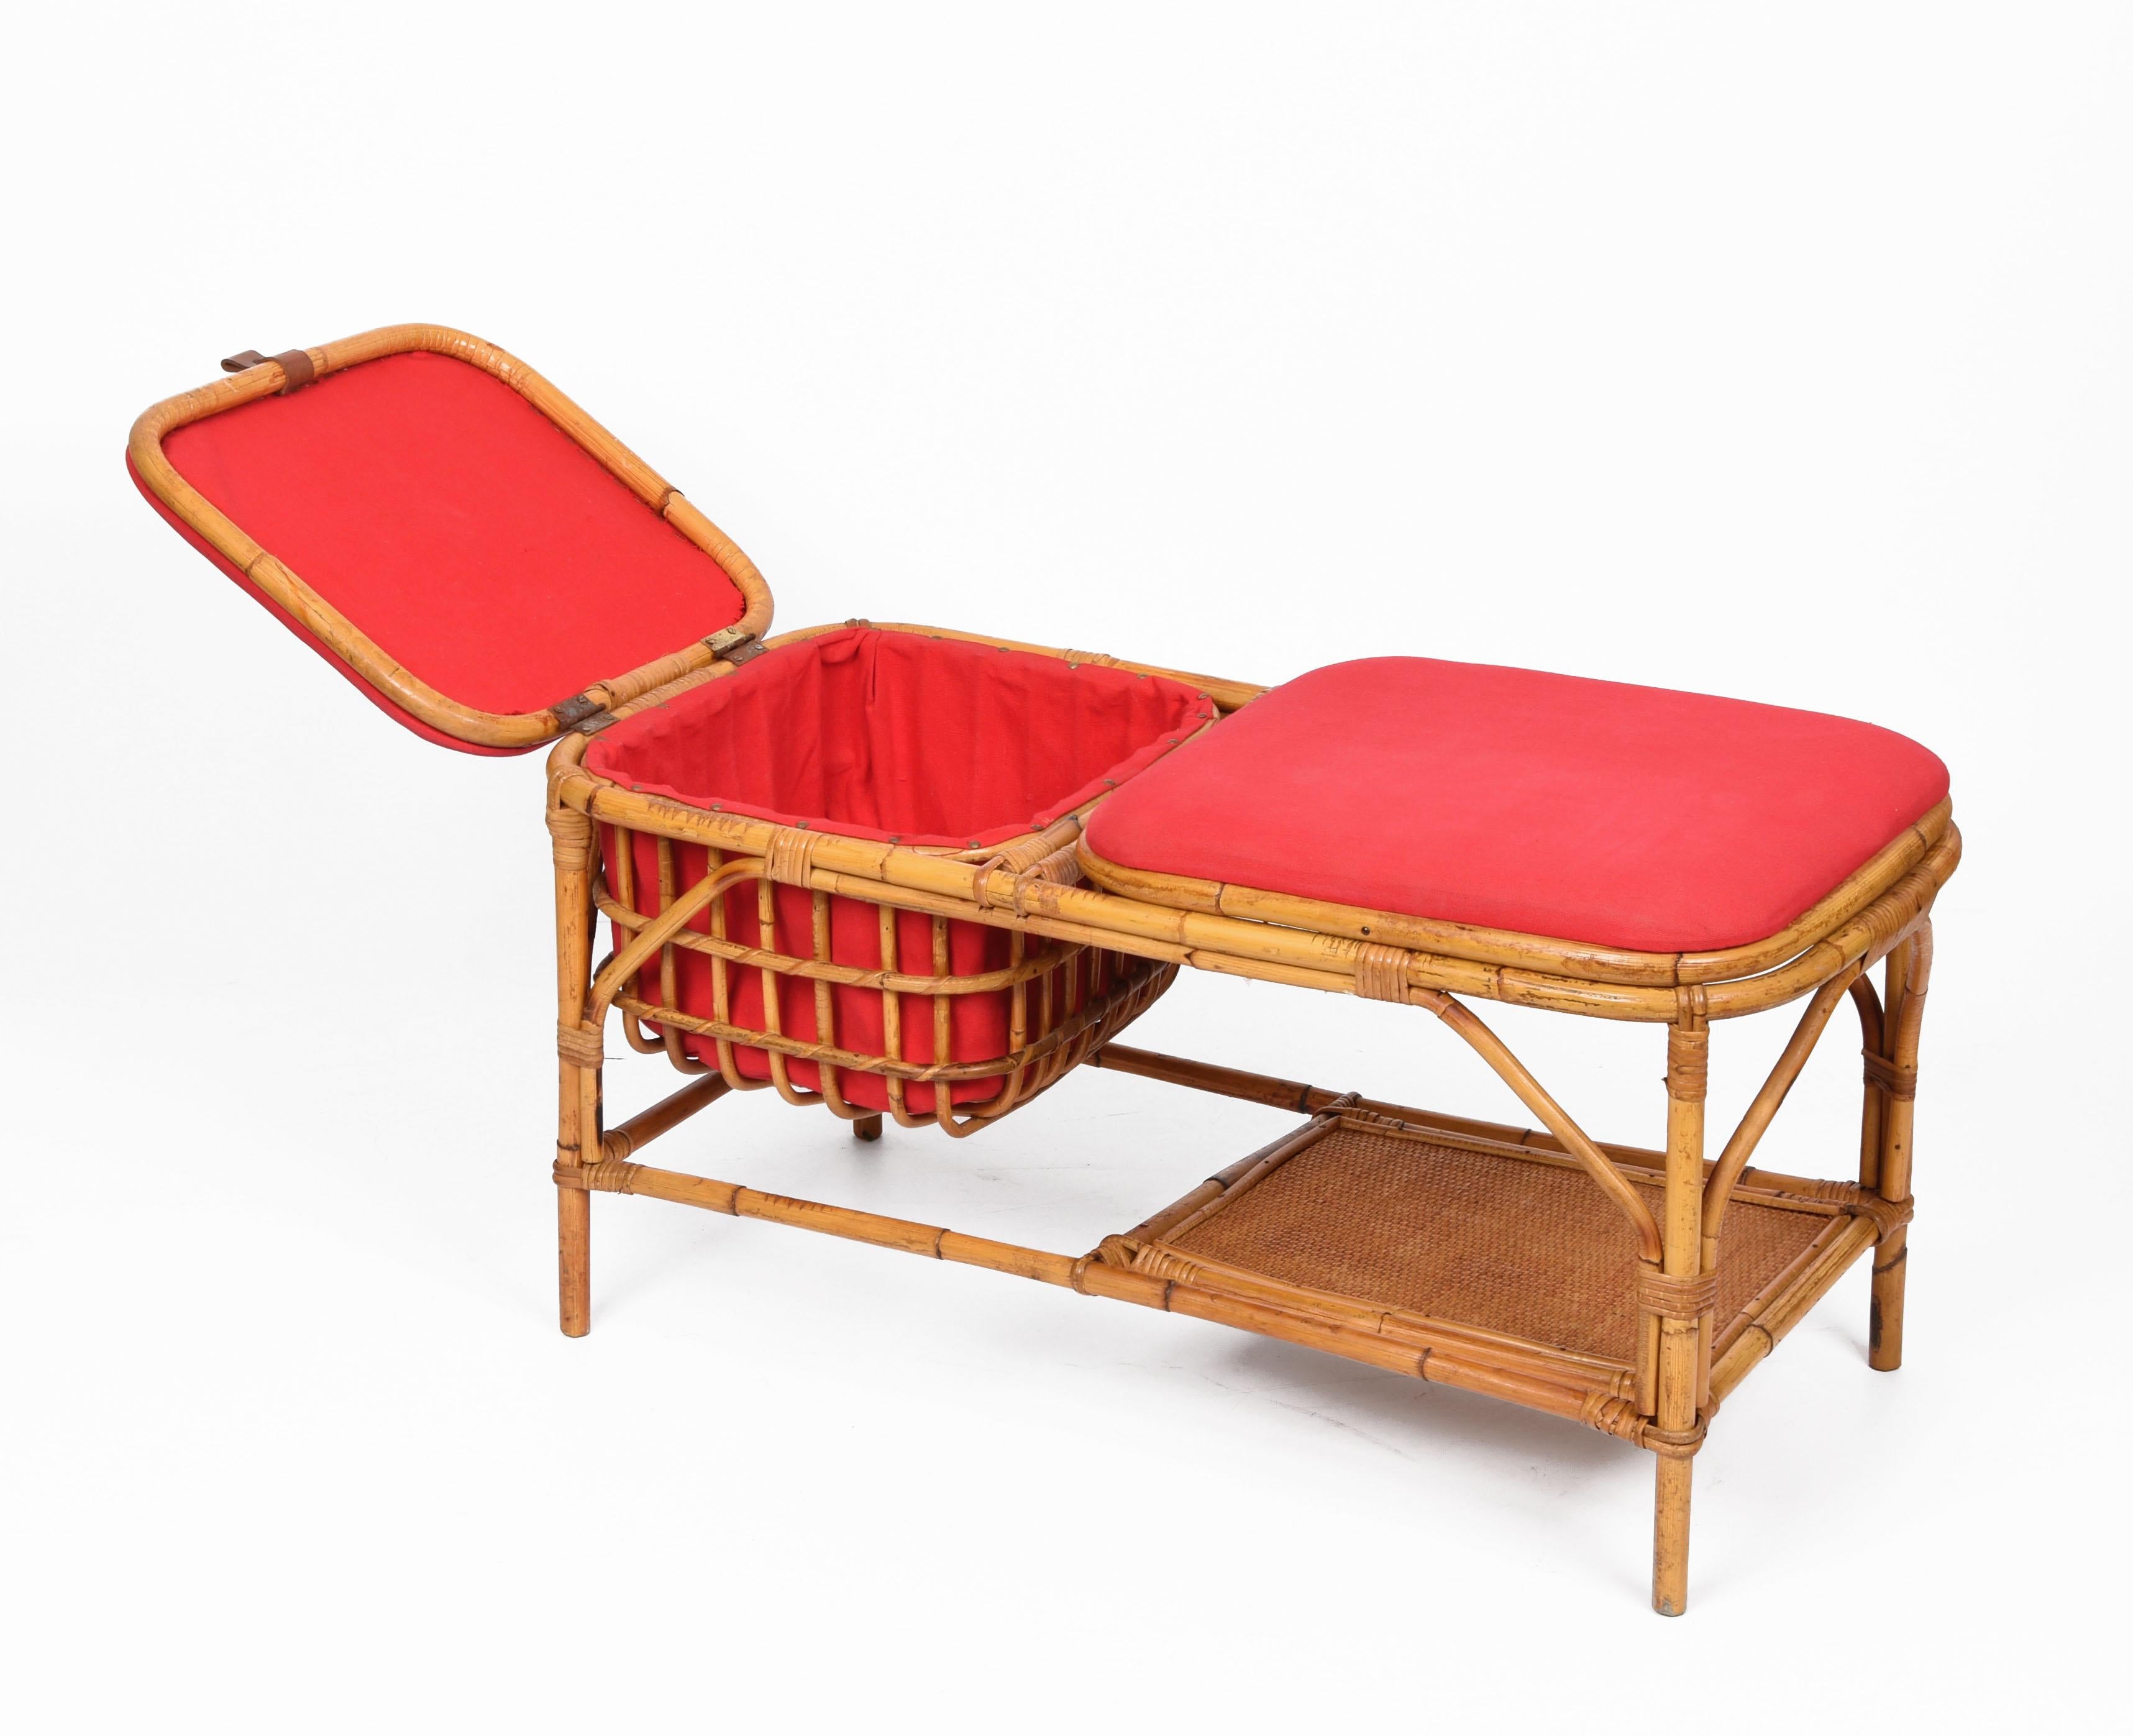 Midcentury Bamboo and Rattan Italian Bench with Box Case, 1950s For Sale 5